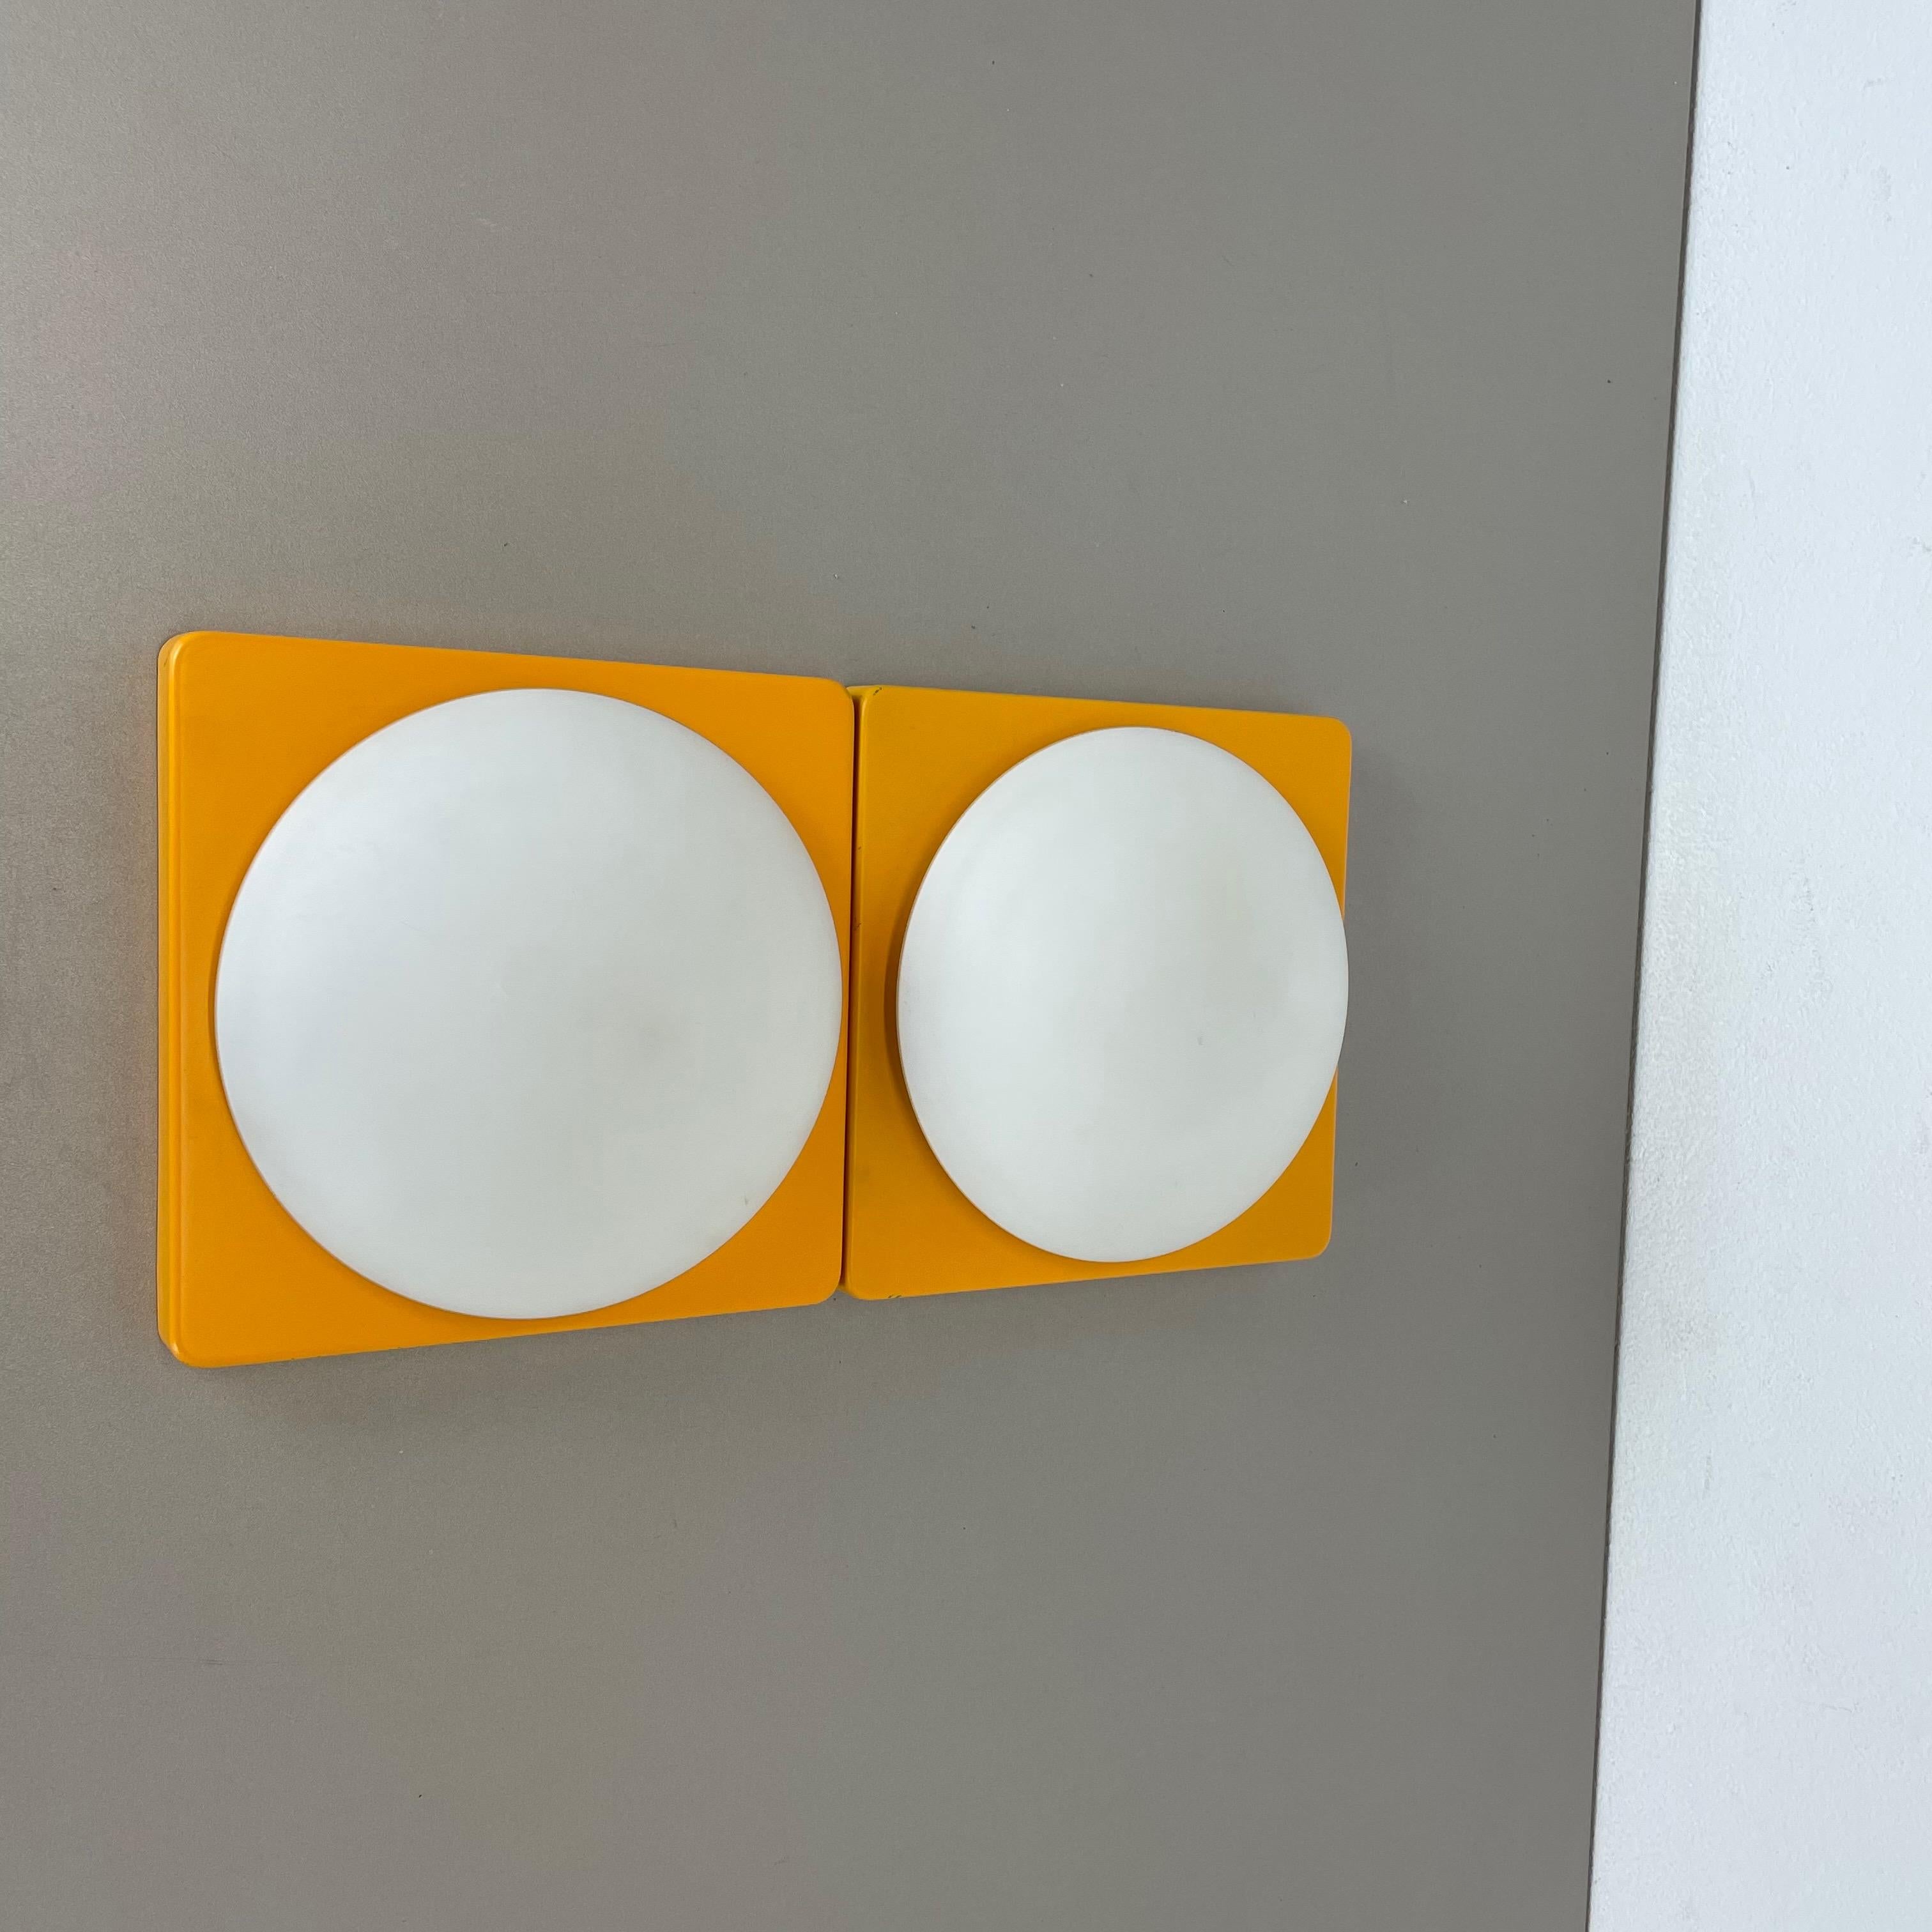 Article:

Set of two cubic wall lights



Producer:

Neuhaus Leuchten, Germany


Age:

1970s


Set of 2 original, 1970s German modernist wall Lights made of solid metal with a frosted glass shade in the middle. This light was